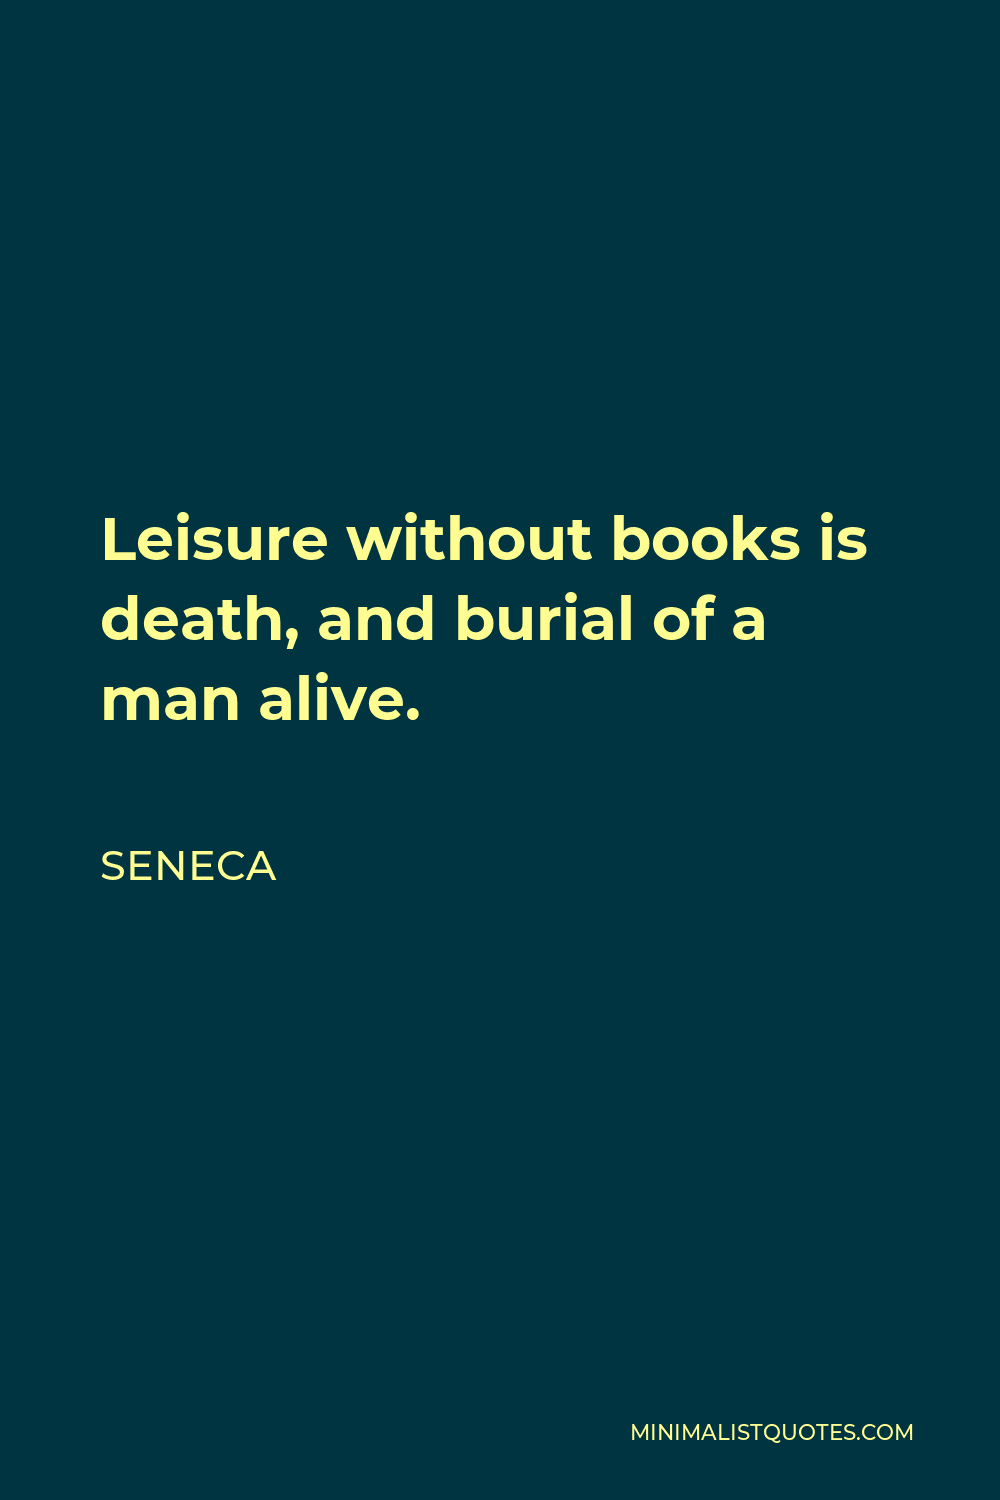 Seneca Quote - Leisure without books is death, and burial of a man alive.